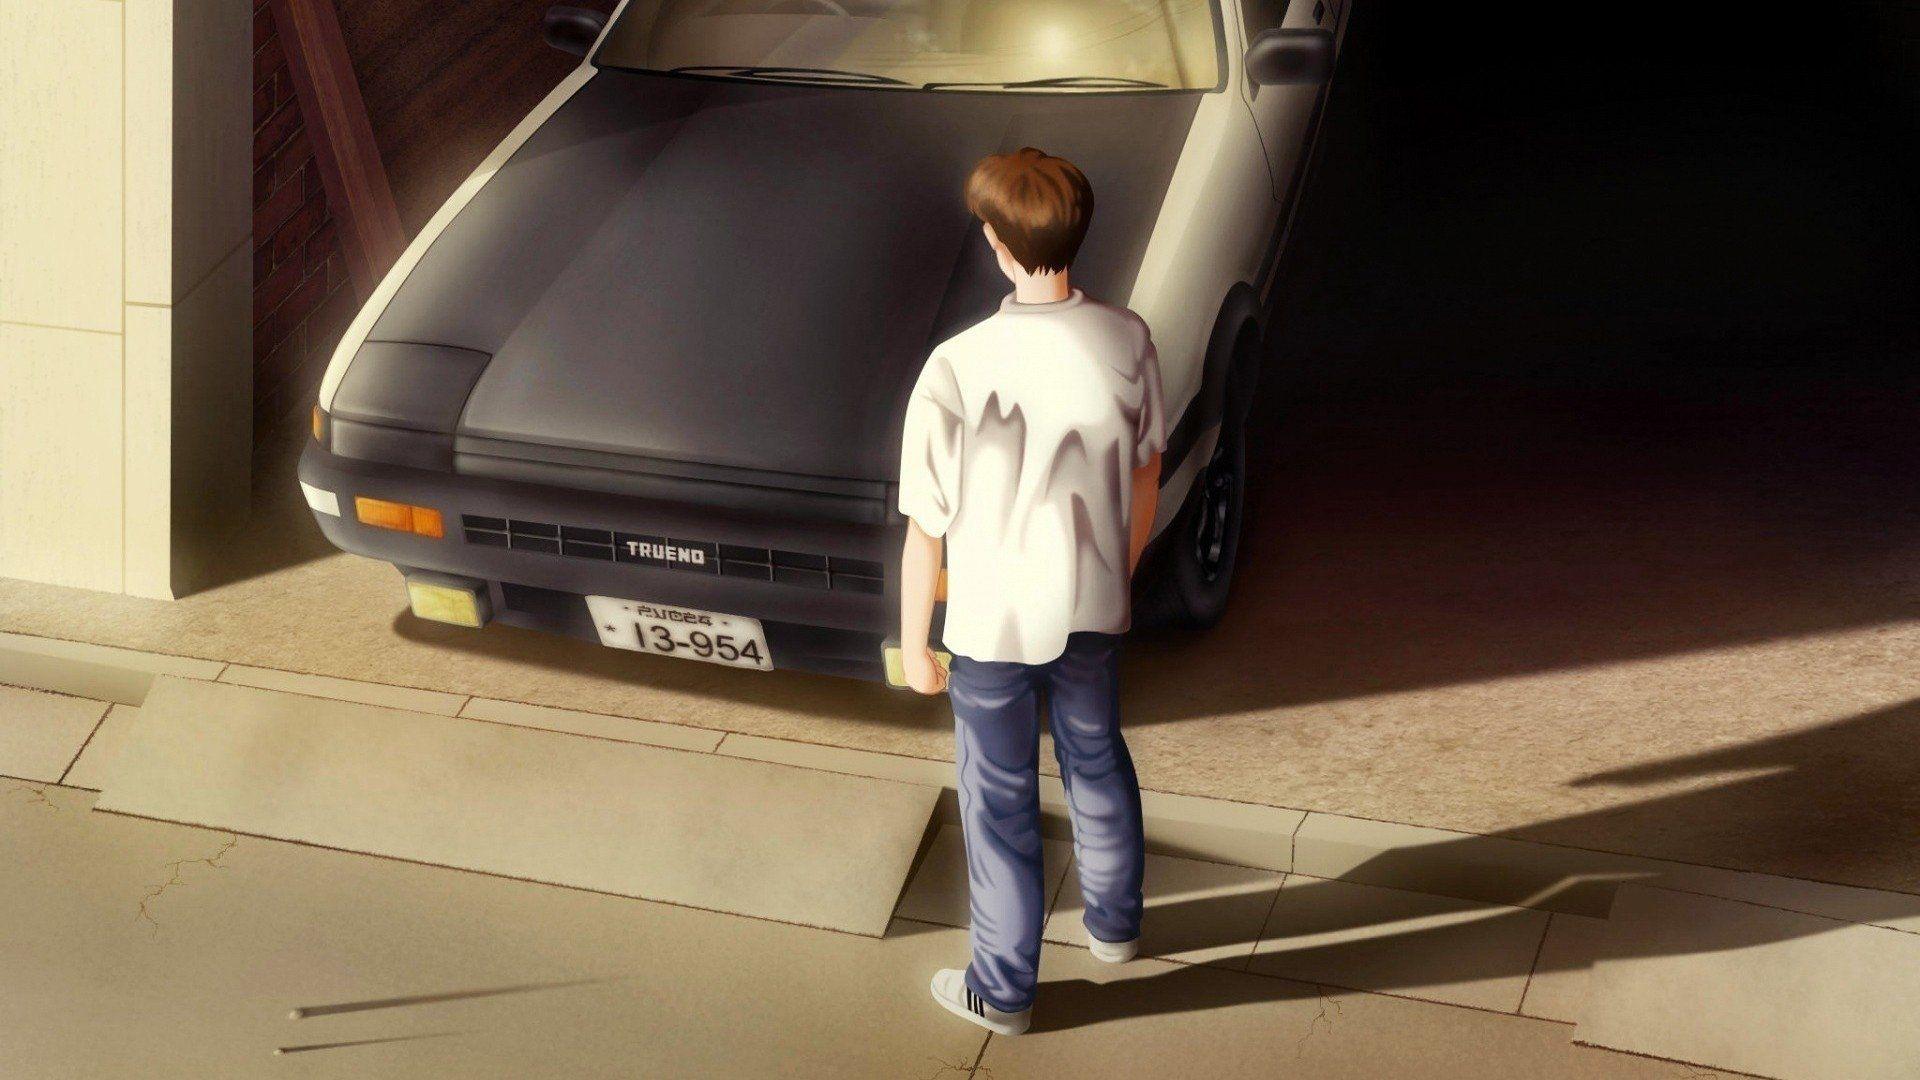 Initial D World  Due to facebooks automatic image compression it is  recommended to download the original wallpapers from our forums Click here  to view the thread httpidforumsnetindexphpshowtopic44870 Original  resolution 1280x720 